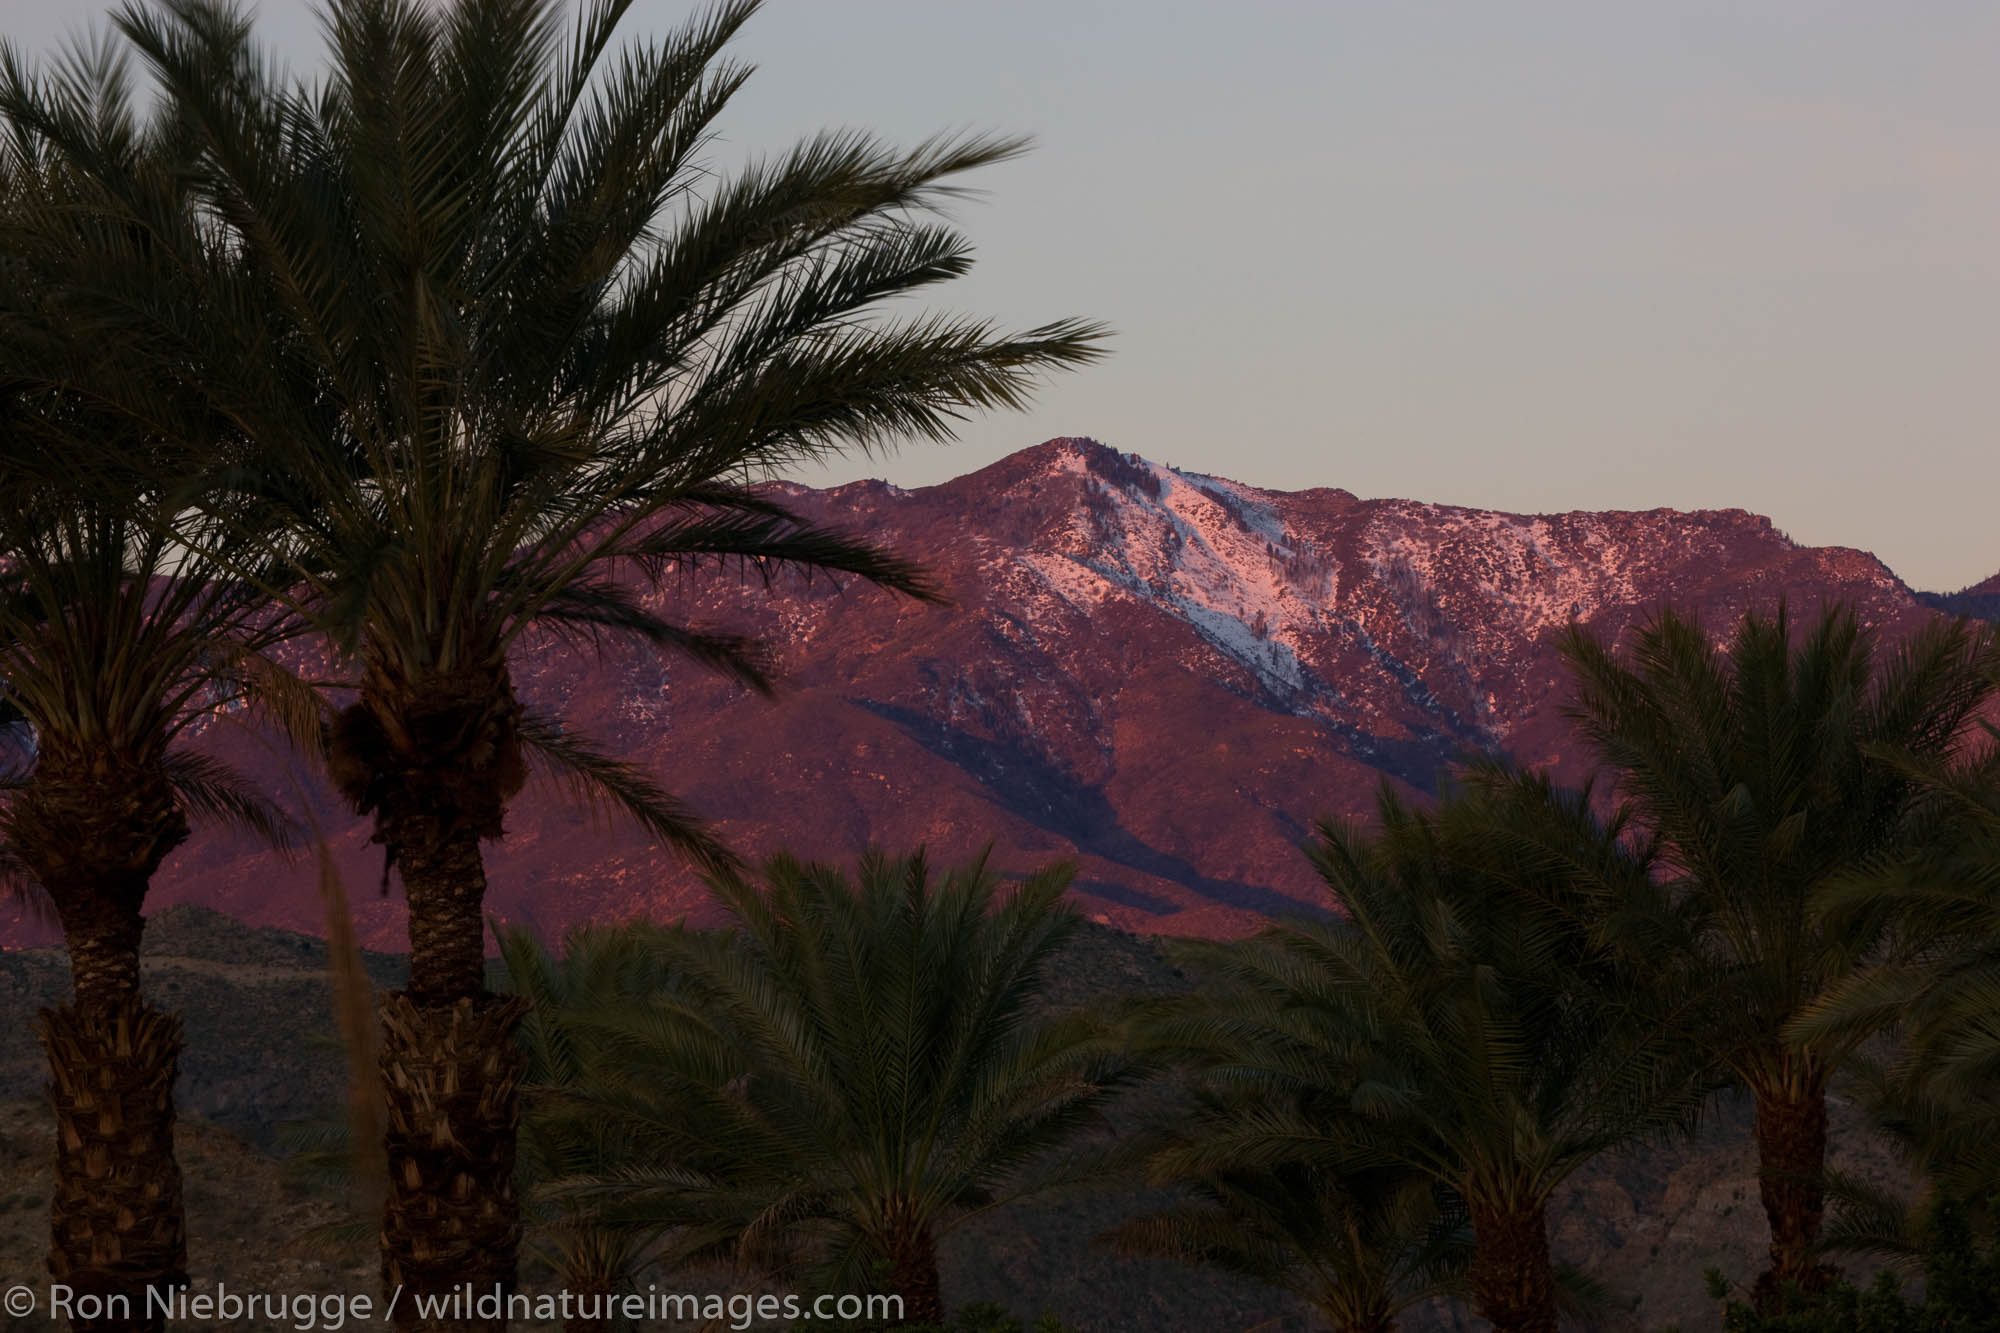 Palm Trees silhouetted against the San Jacinto Mountains, Rancho Mirage, California.